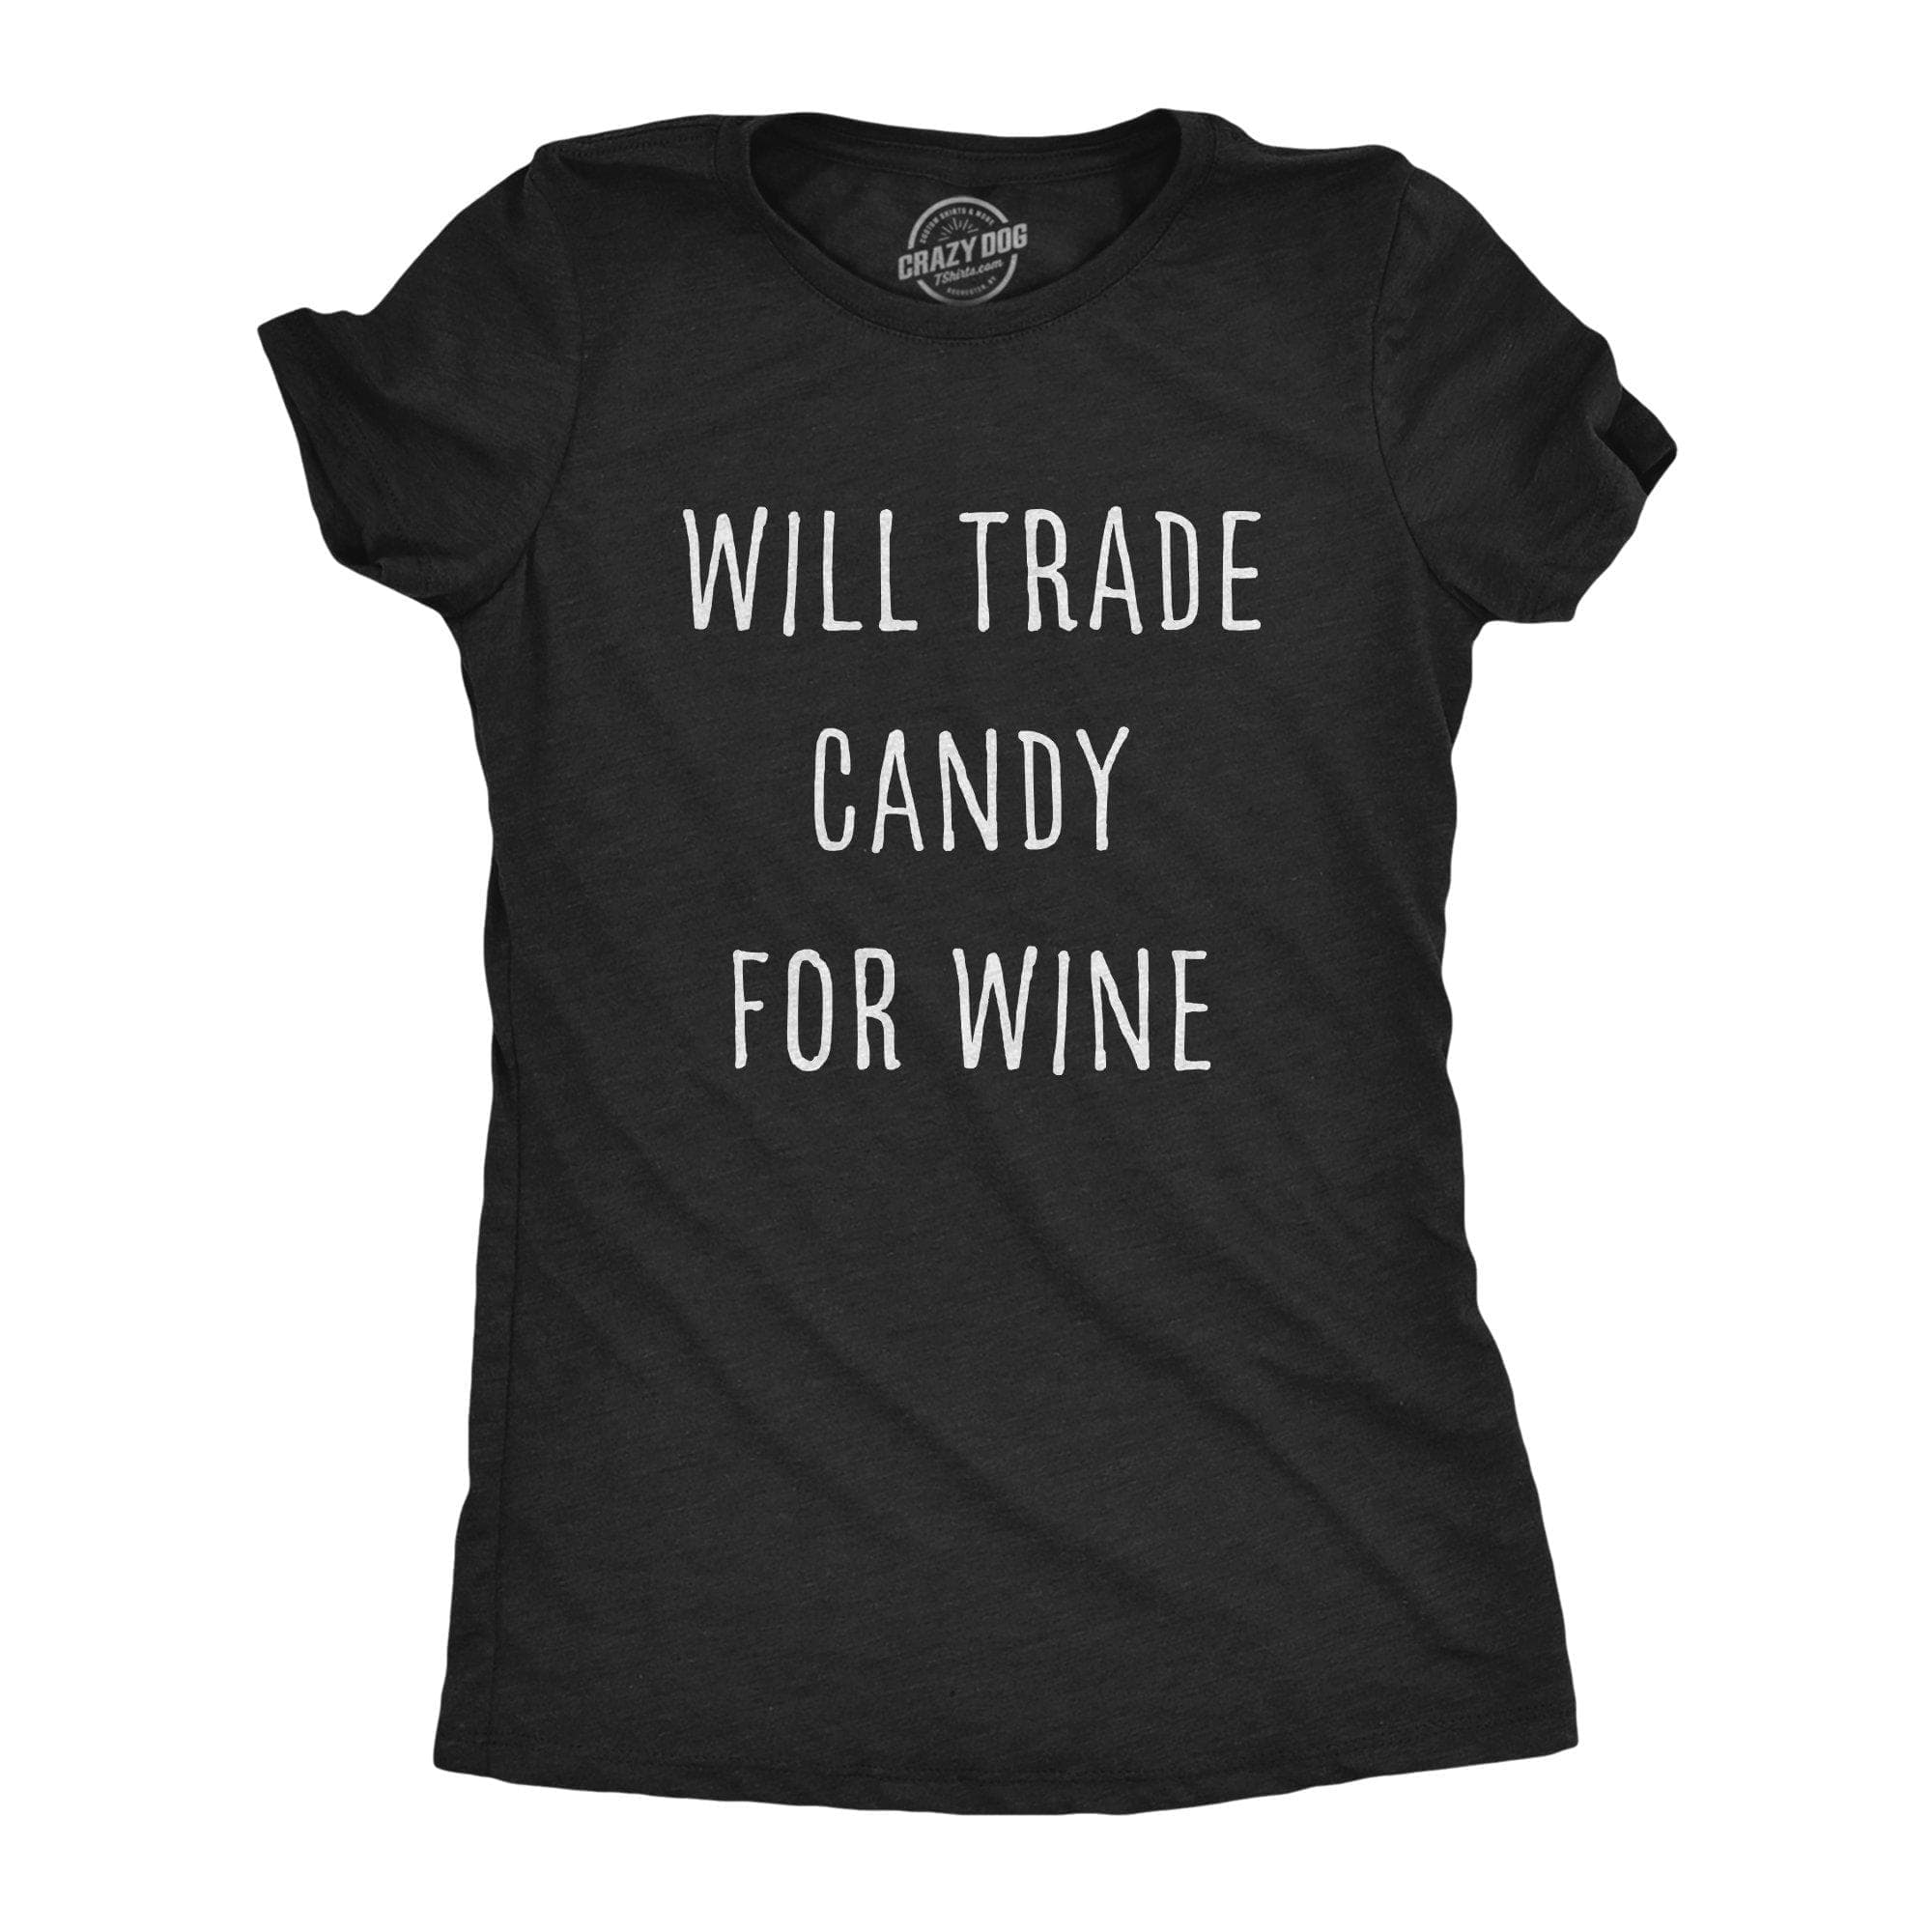 Will Trade Candy For Wine Women's Tshirt - Crazy Dog T-Shirts